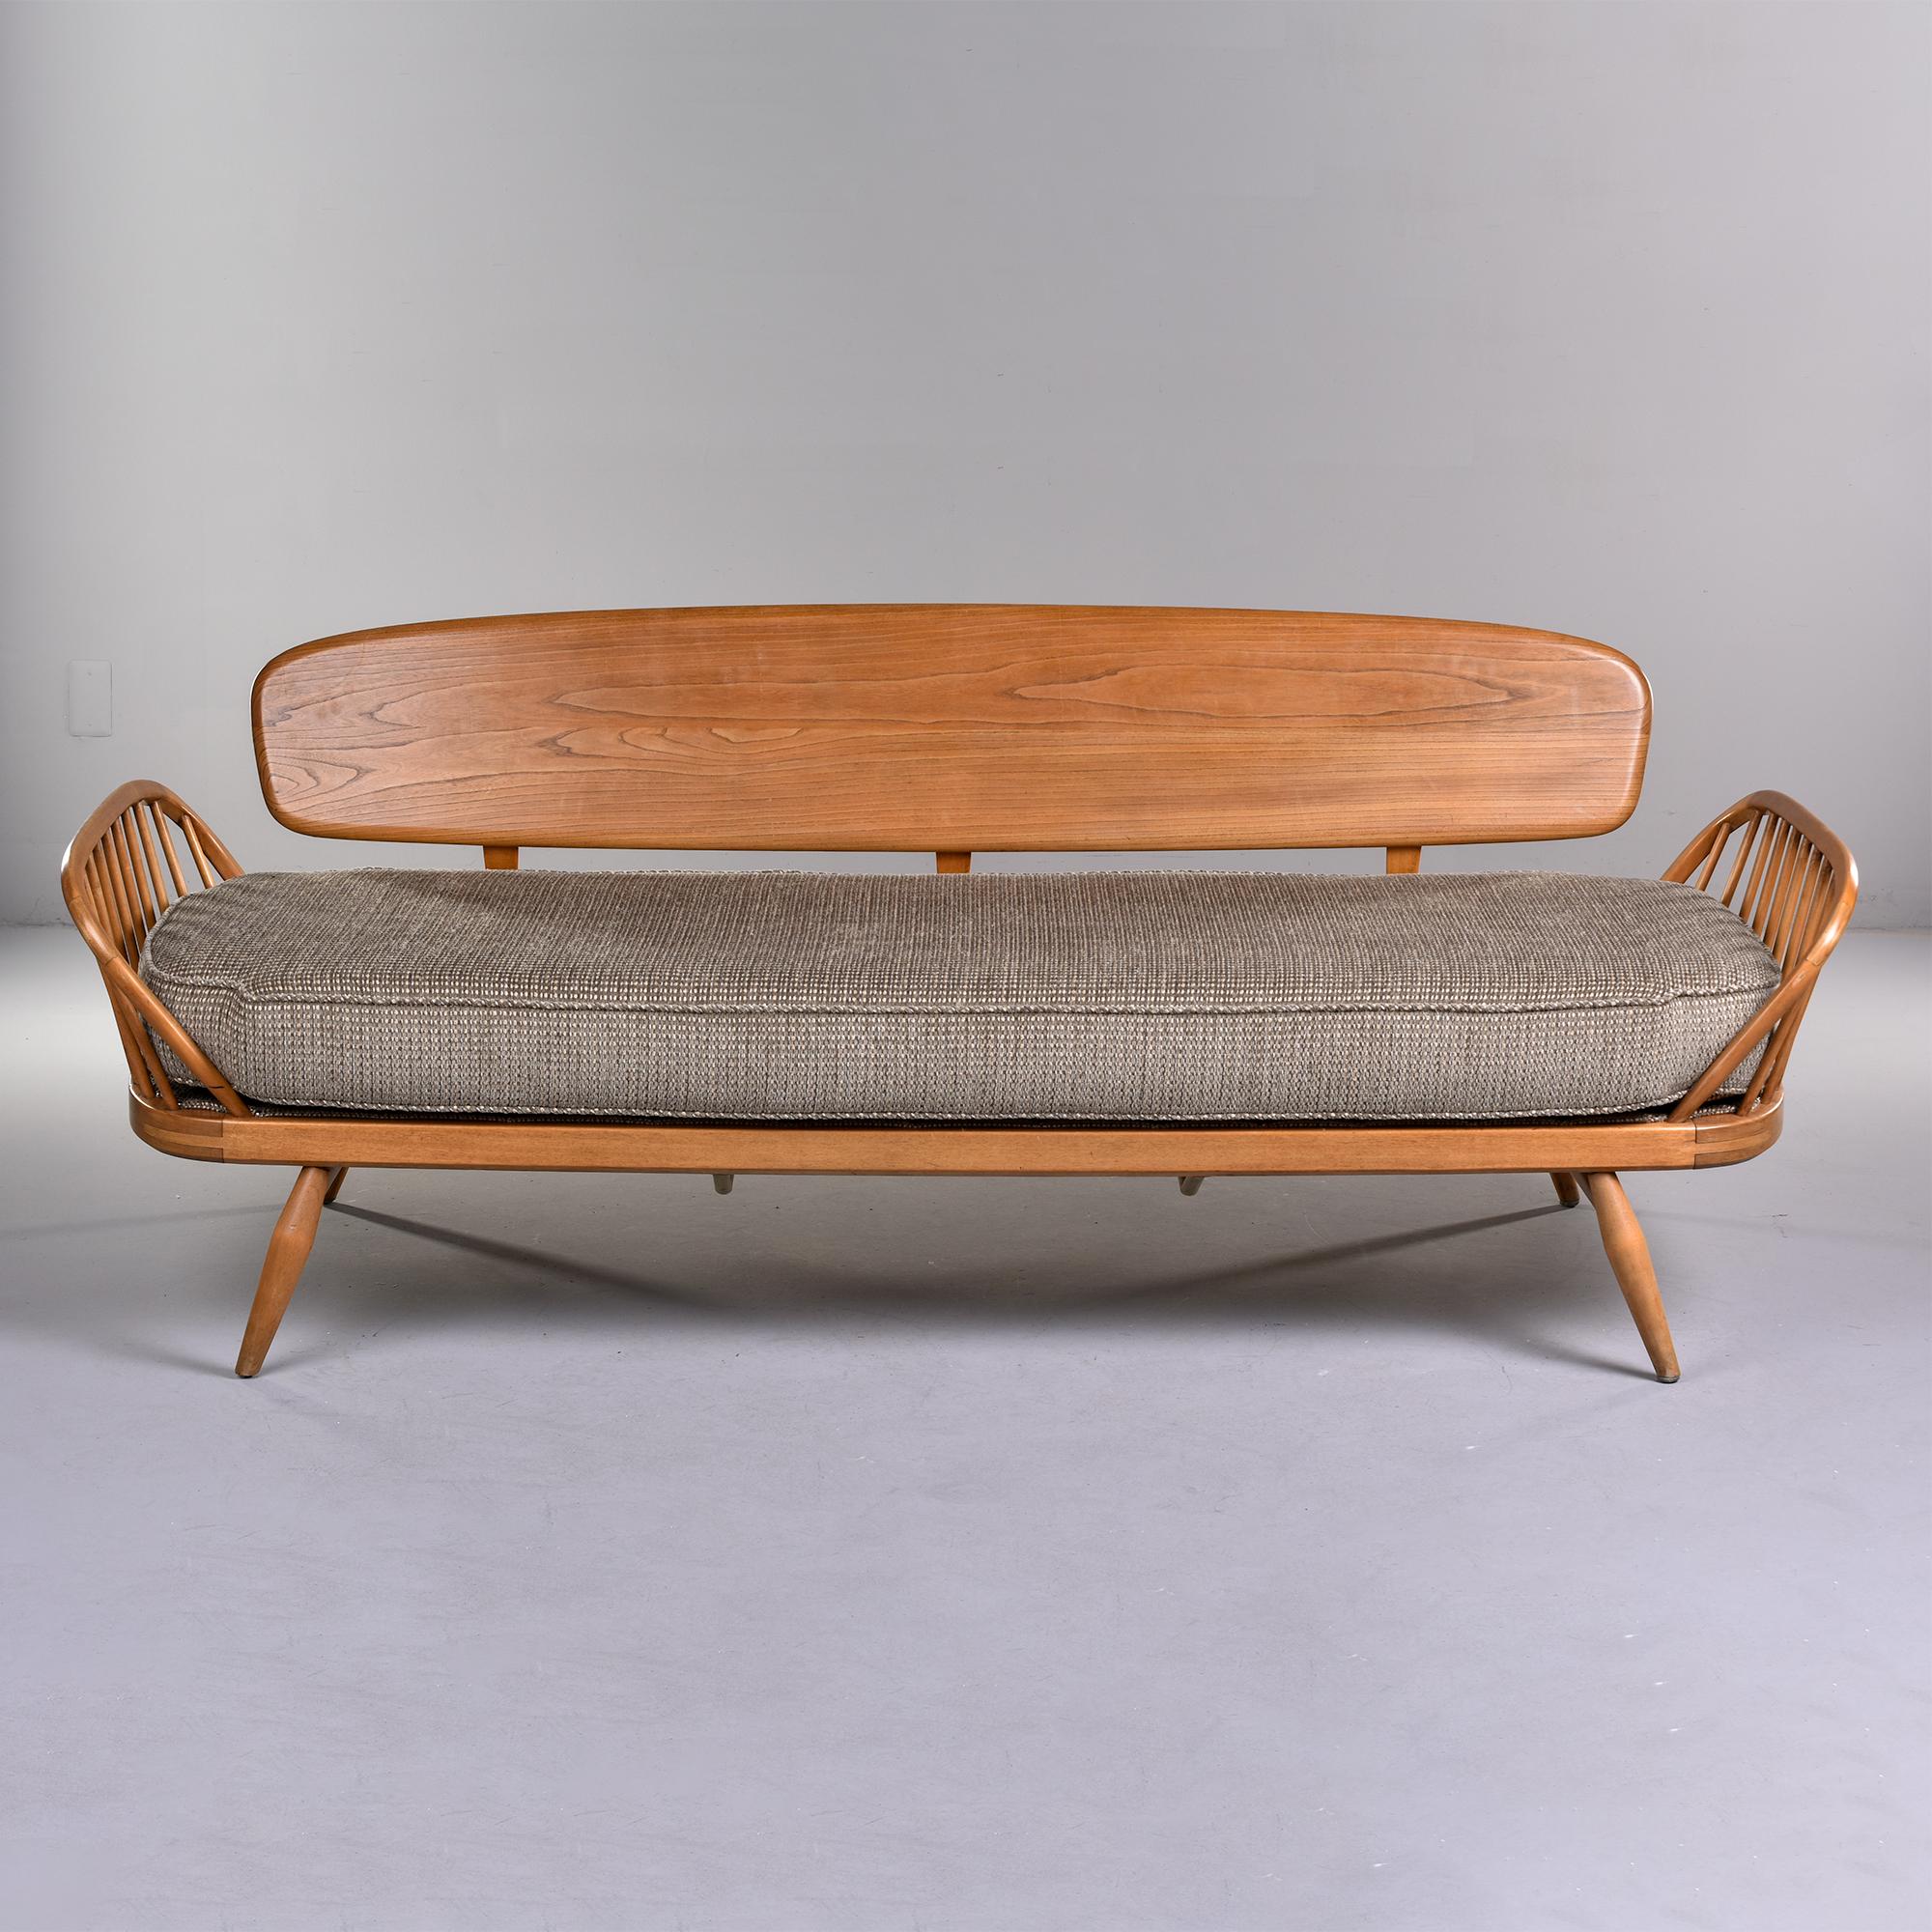 Circa 1960 ash framed day bed with new upholstery. Found in England, this has new webbing, all new foam and upholstery fabric is a neutral, nubby chenille. Day bed or studio couch frame has side / arm supports, tapered and splayed legs and a back